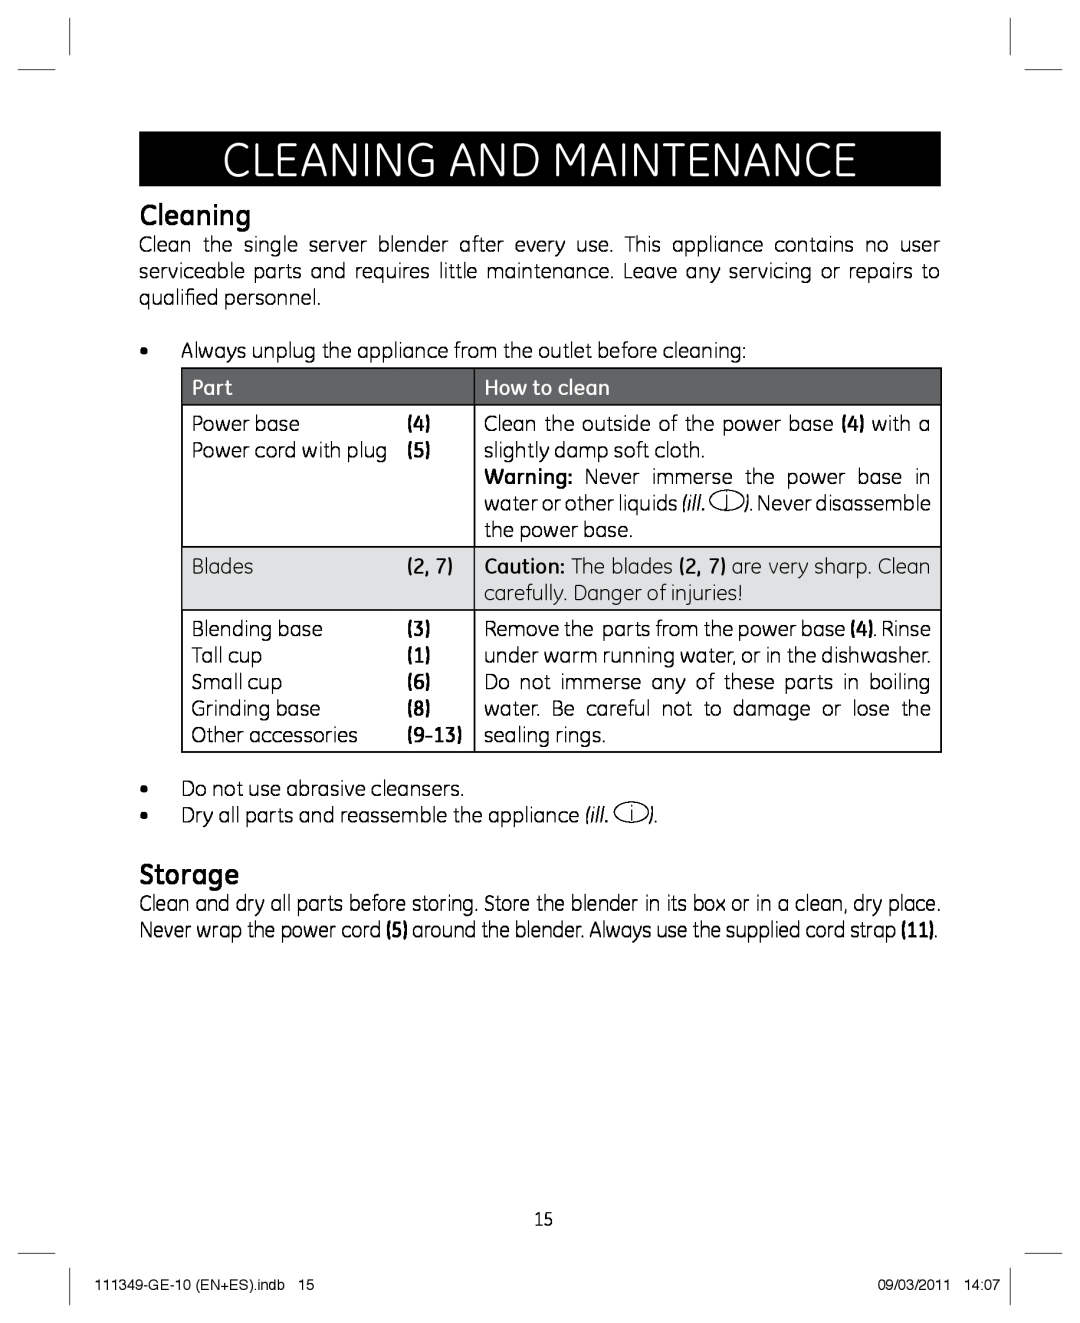 GE 898679 manual Cleaning and maintenance, Storage, Part, How to clean, 9-13 